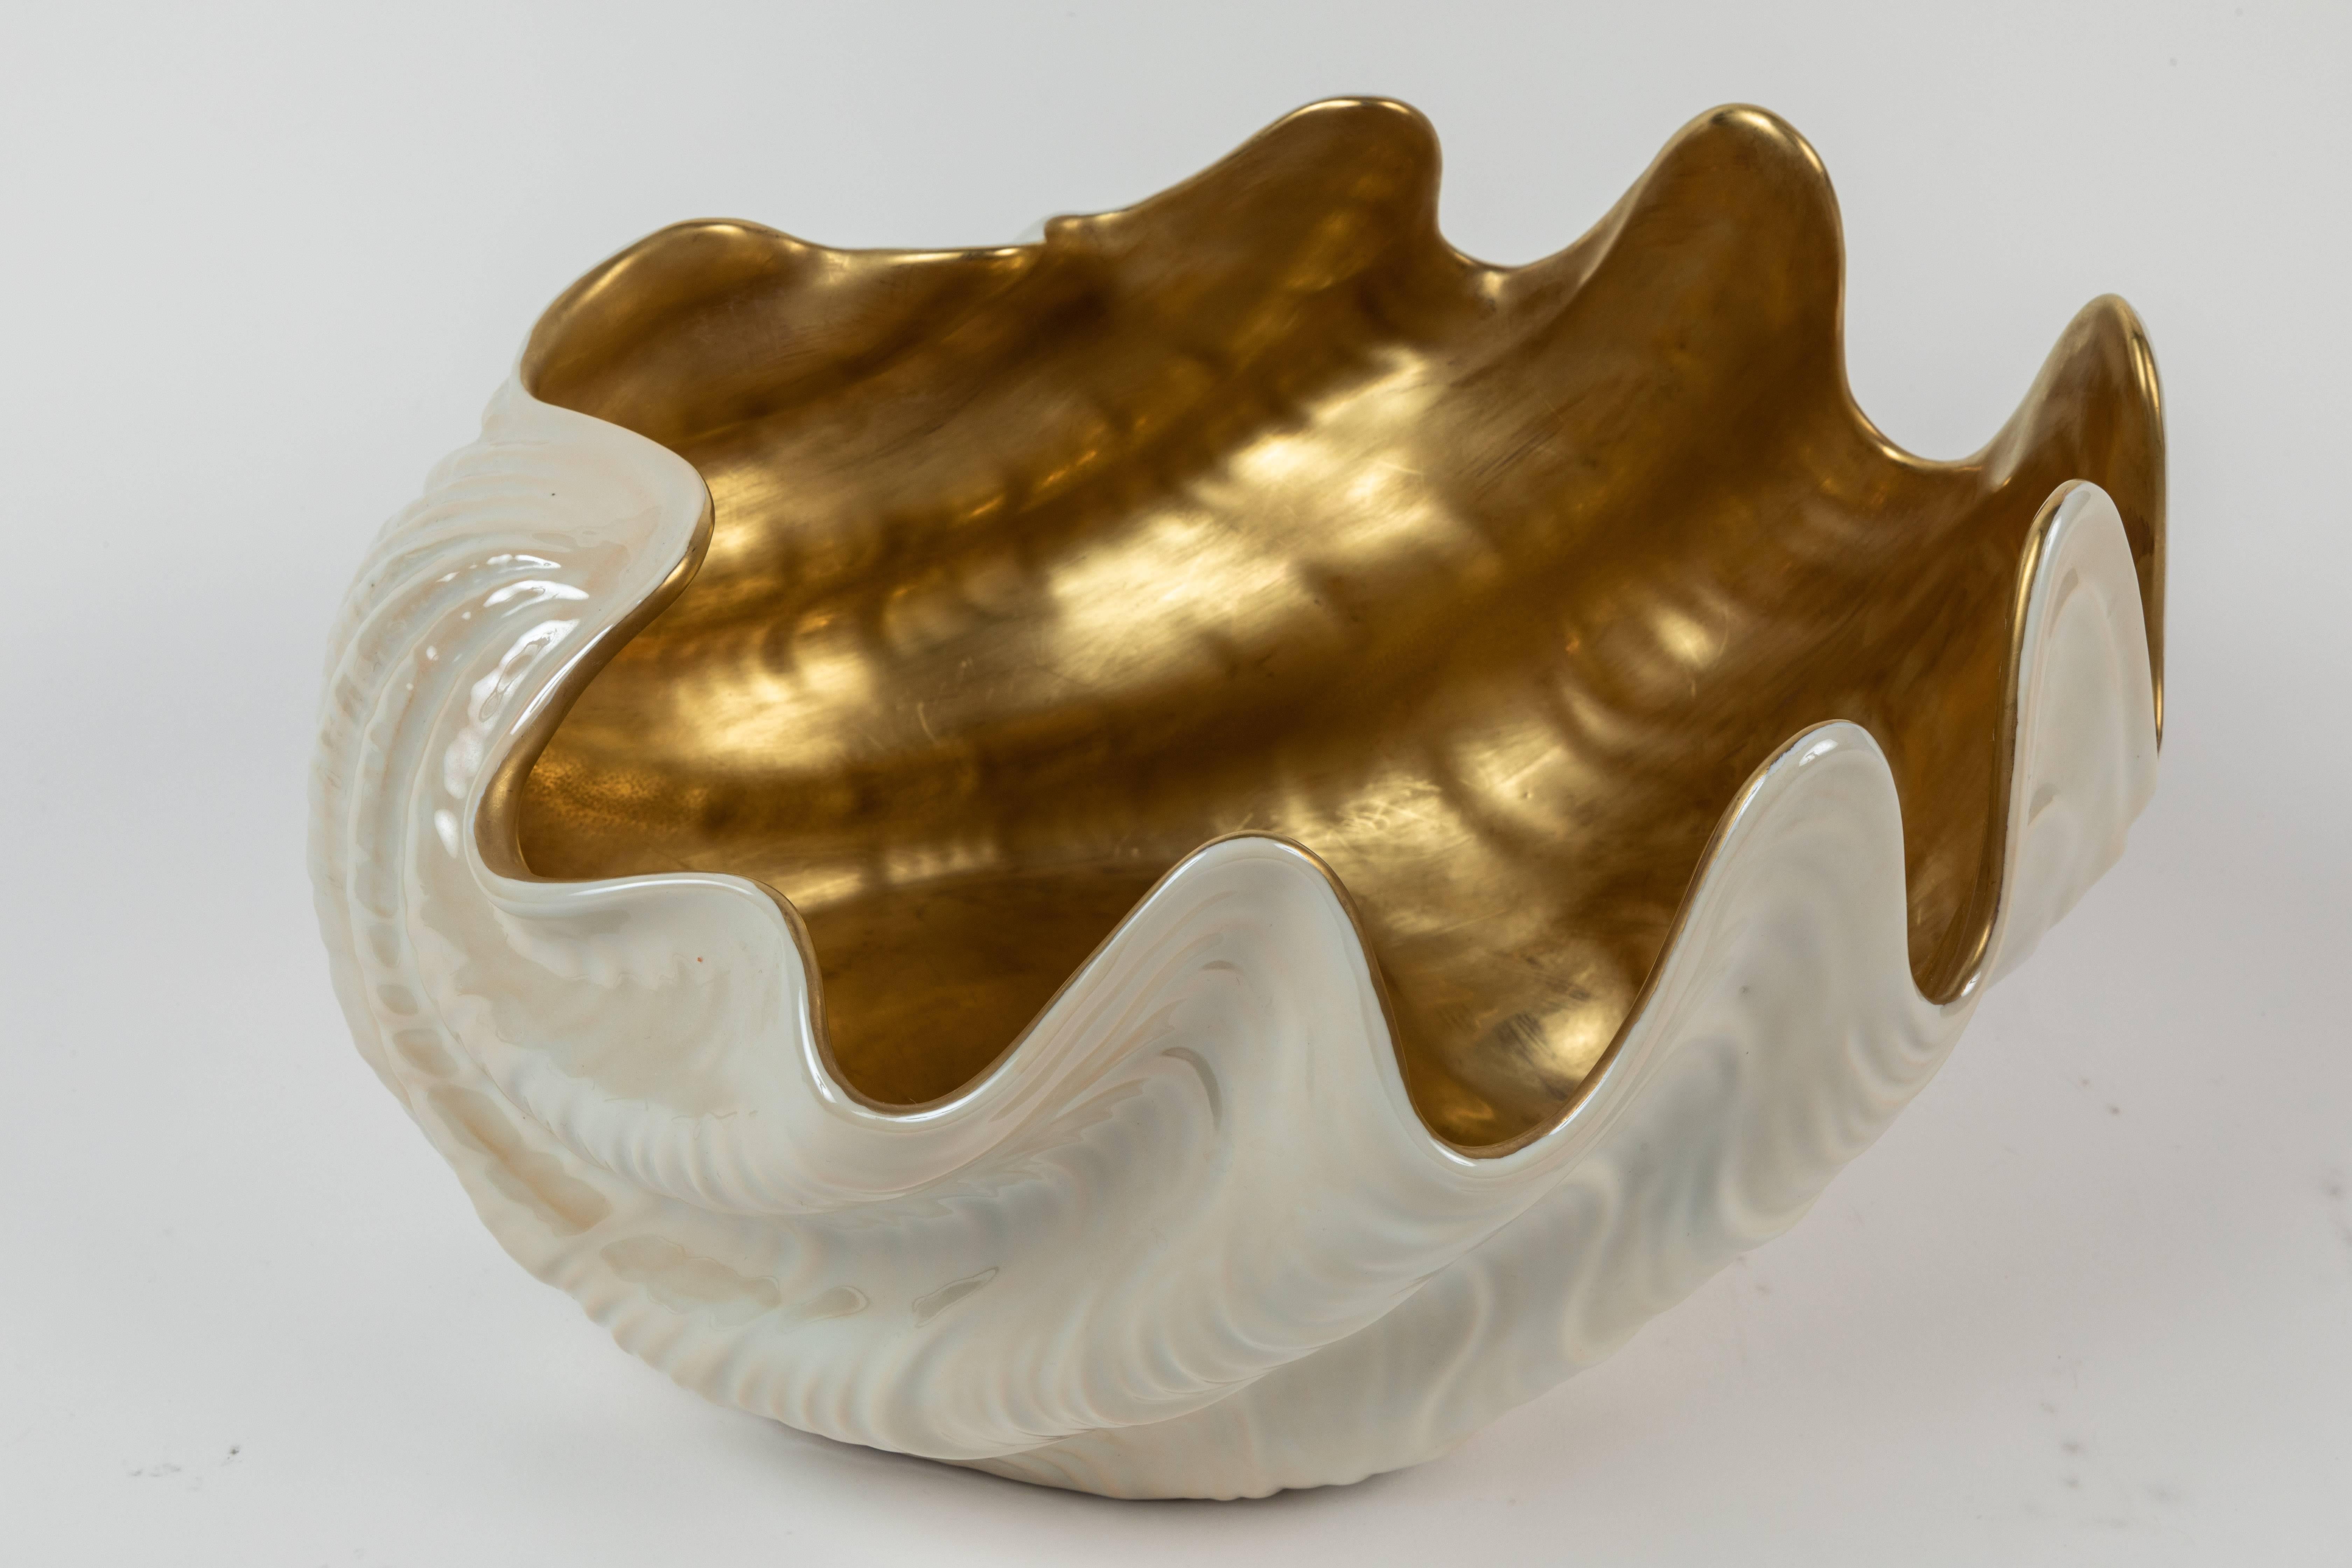 Large and stylized porcelain shell Dorn bowl. The exterior of the shell has a glazed porcelain finish while the interior is a luxurious gold finish. Impressive scale.